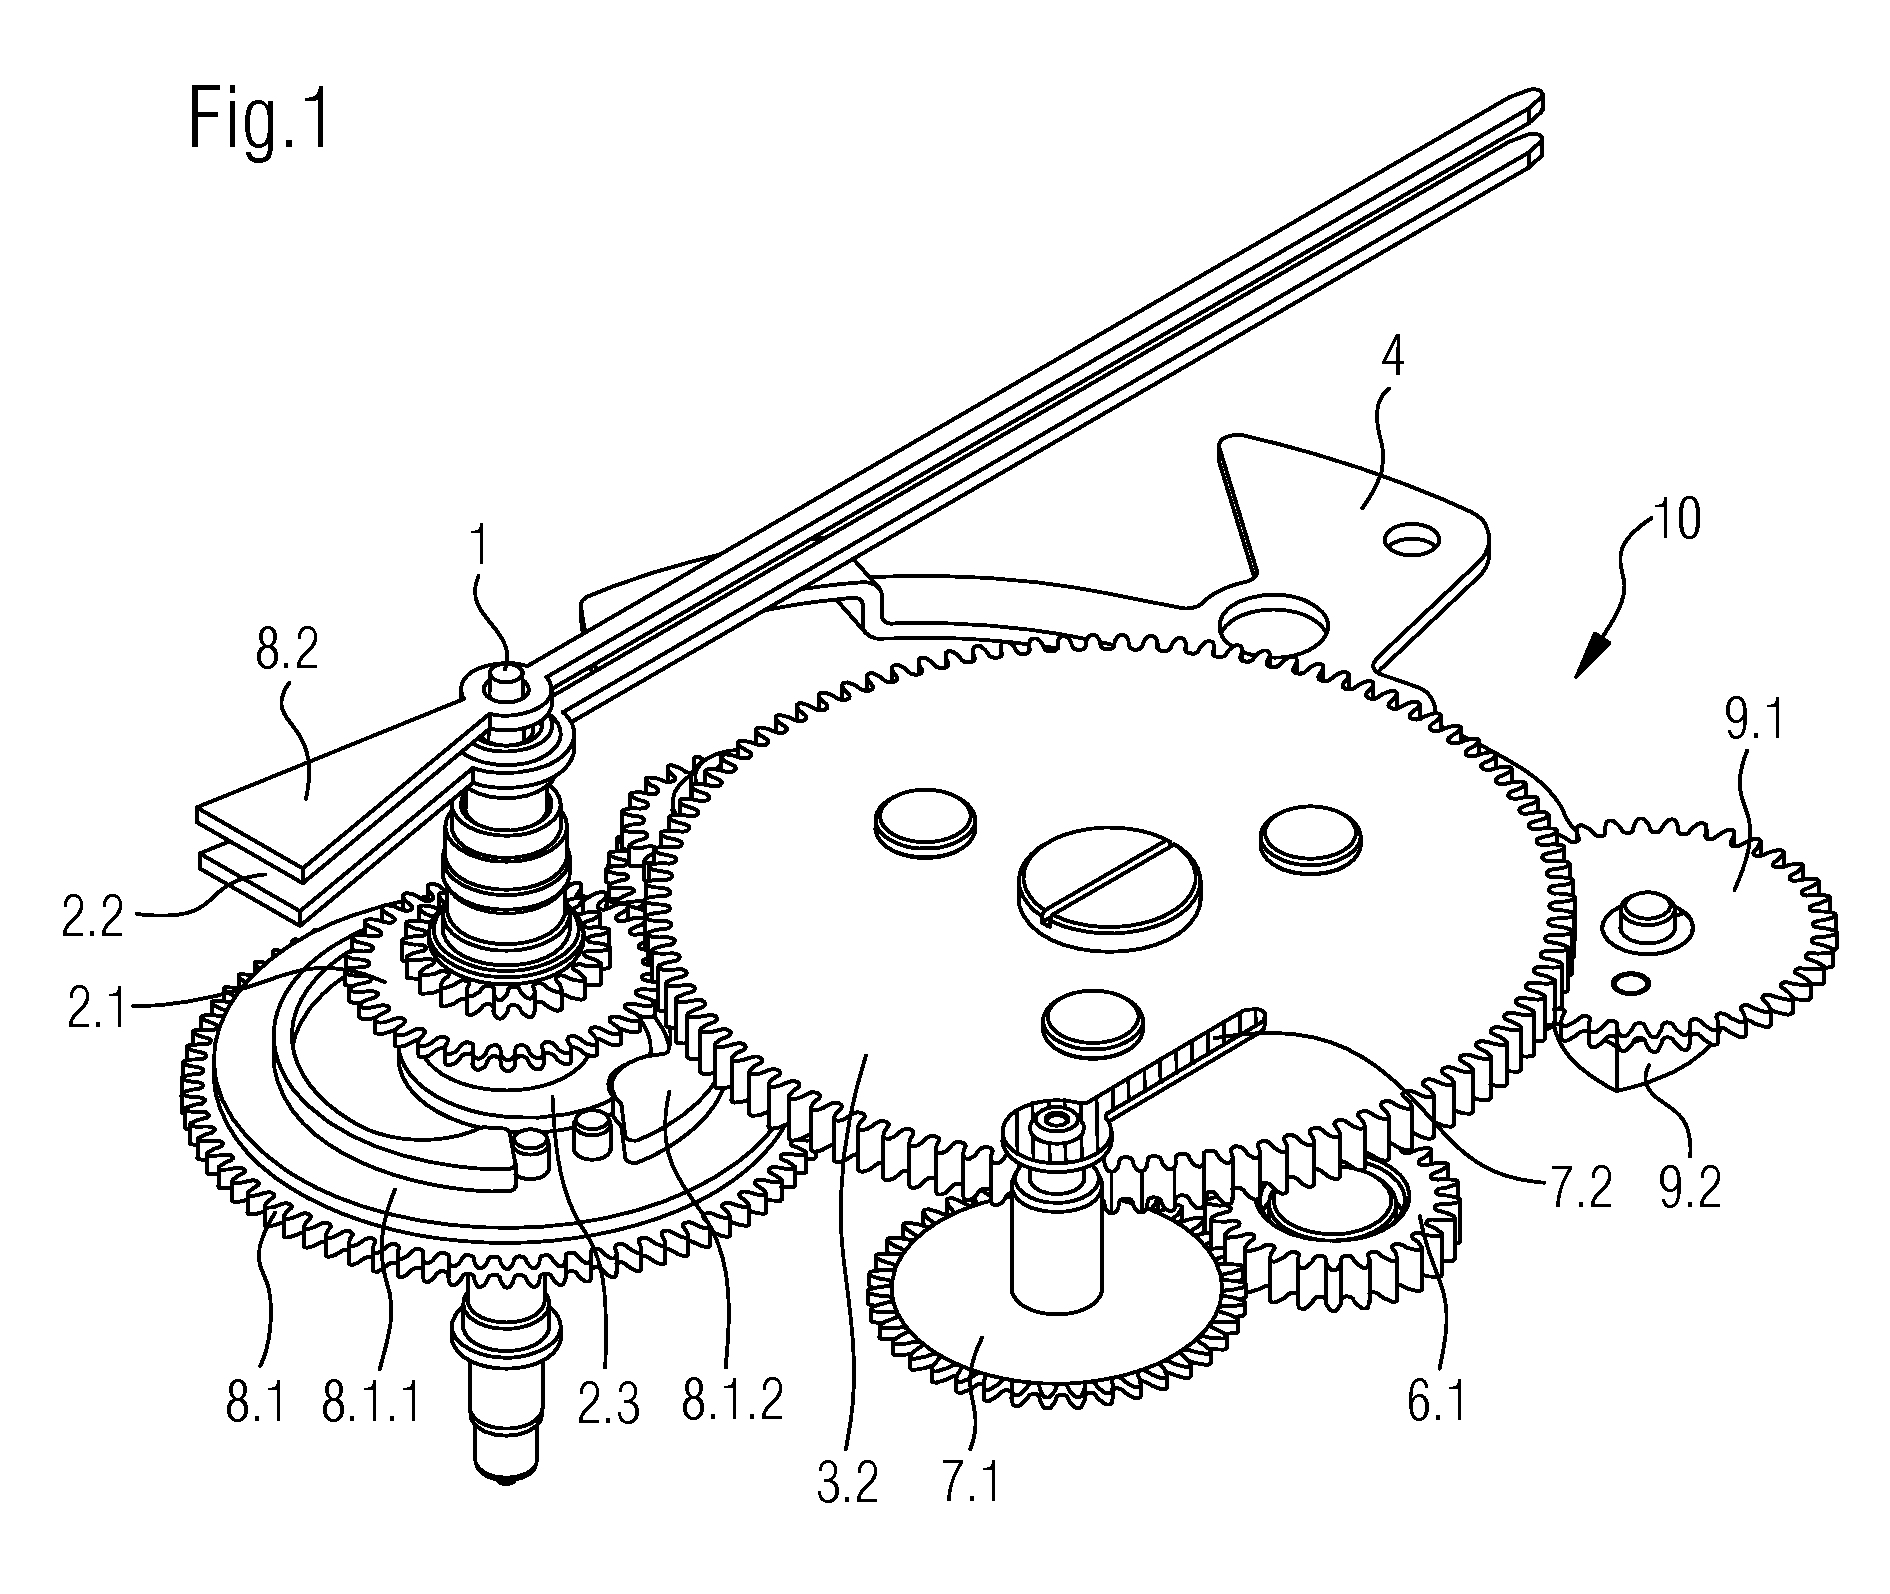 Split-seconds device with epicycloidal train for a timepiece